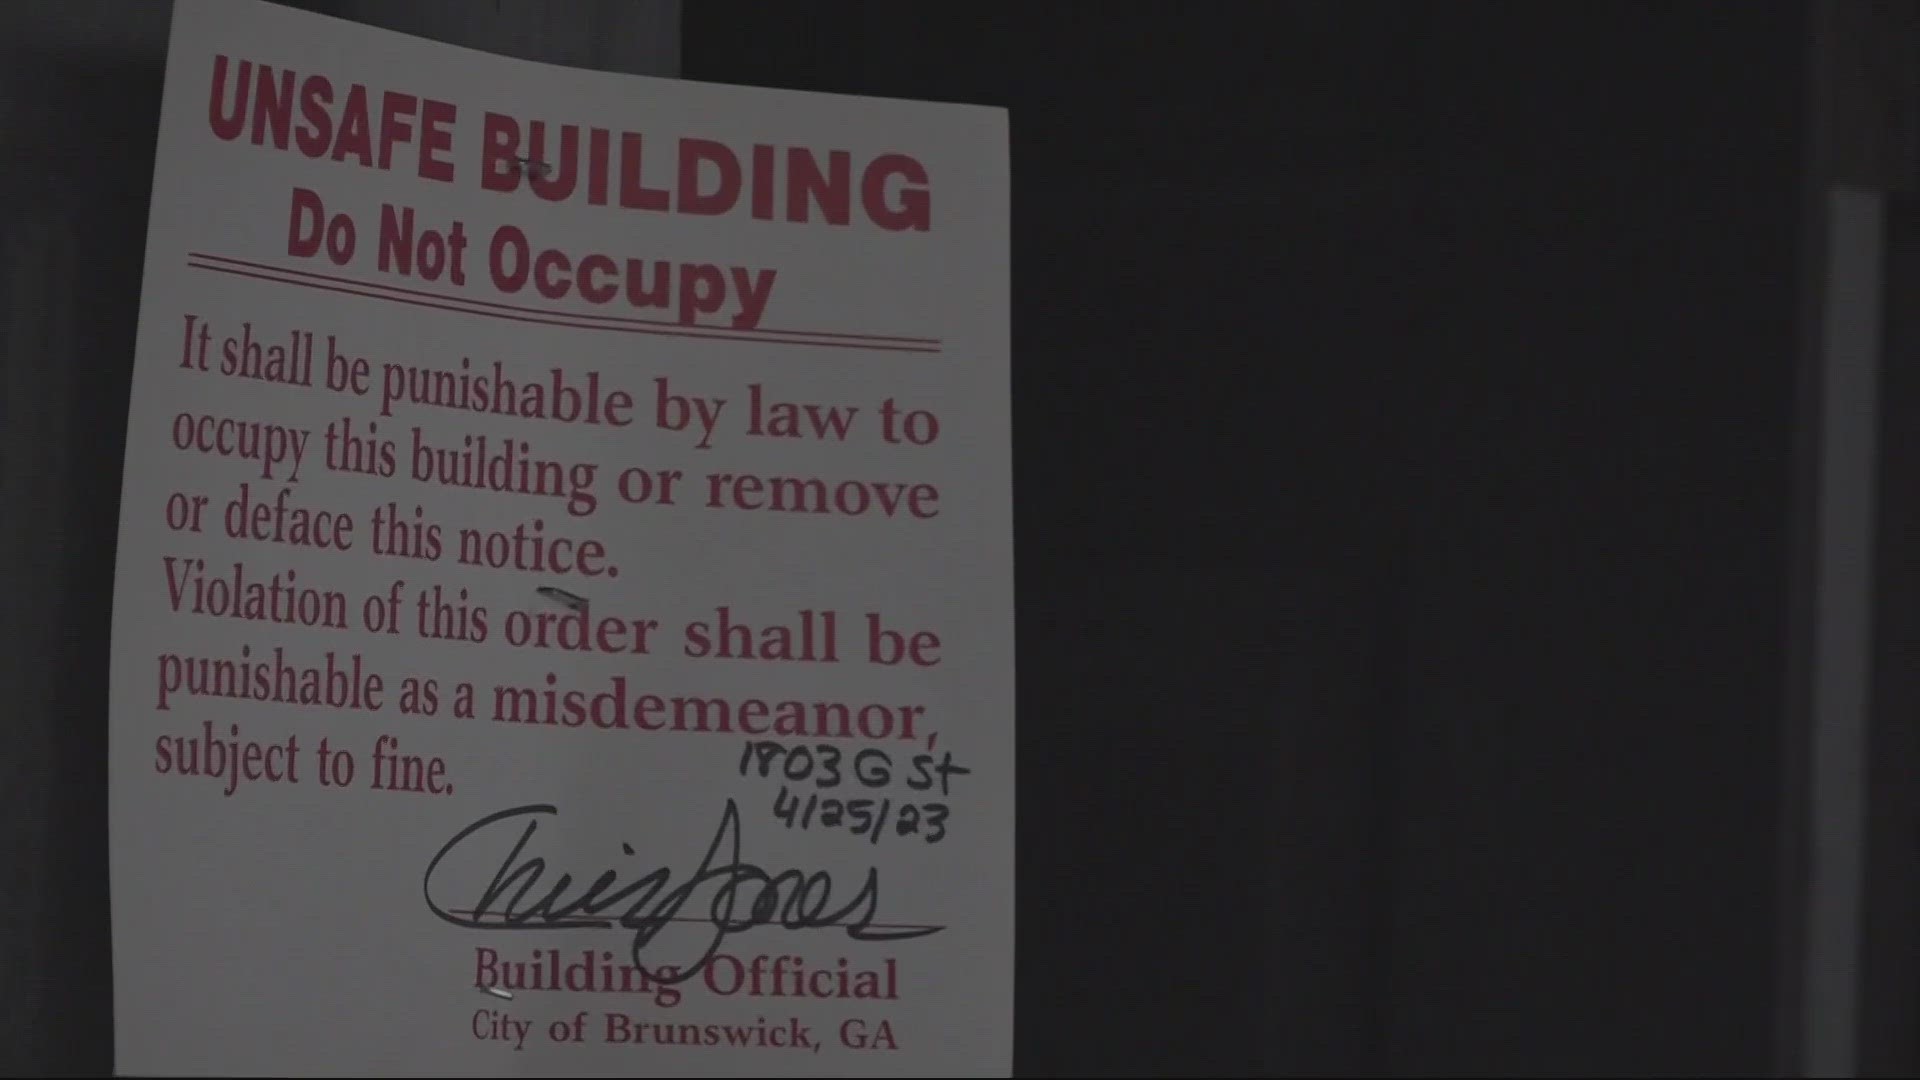 The building was deemed unsafe by the city.